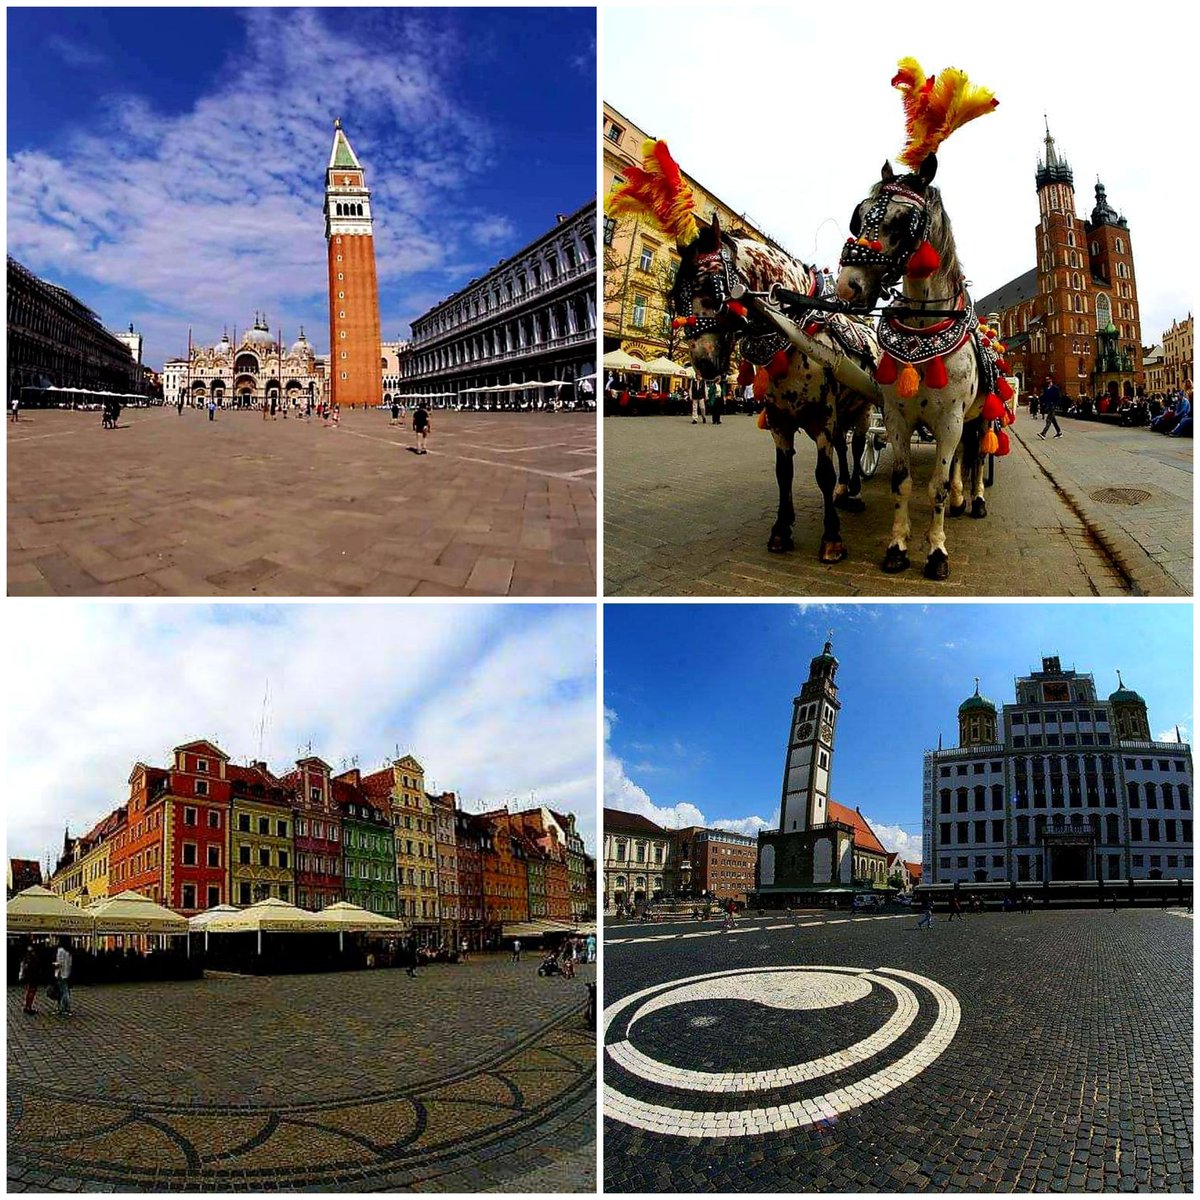 Hi 😊
This week's #Top4Theme is #Top4Square so my entry:
1. #Venice, St Mark's Square
2. #Kraków, Main Market Square, 
3. #Wrocław,Market Square
4. #Augsburg, Town Hall Square
THX to hosts: 
 @Giselleinmotion @perthtravelers @Touchse @CharlesMcCool